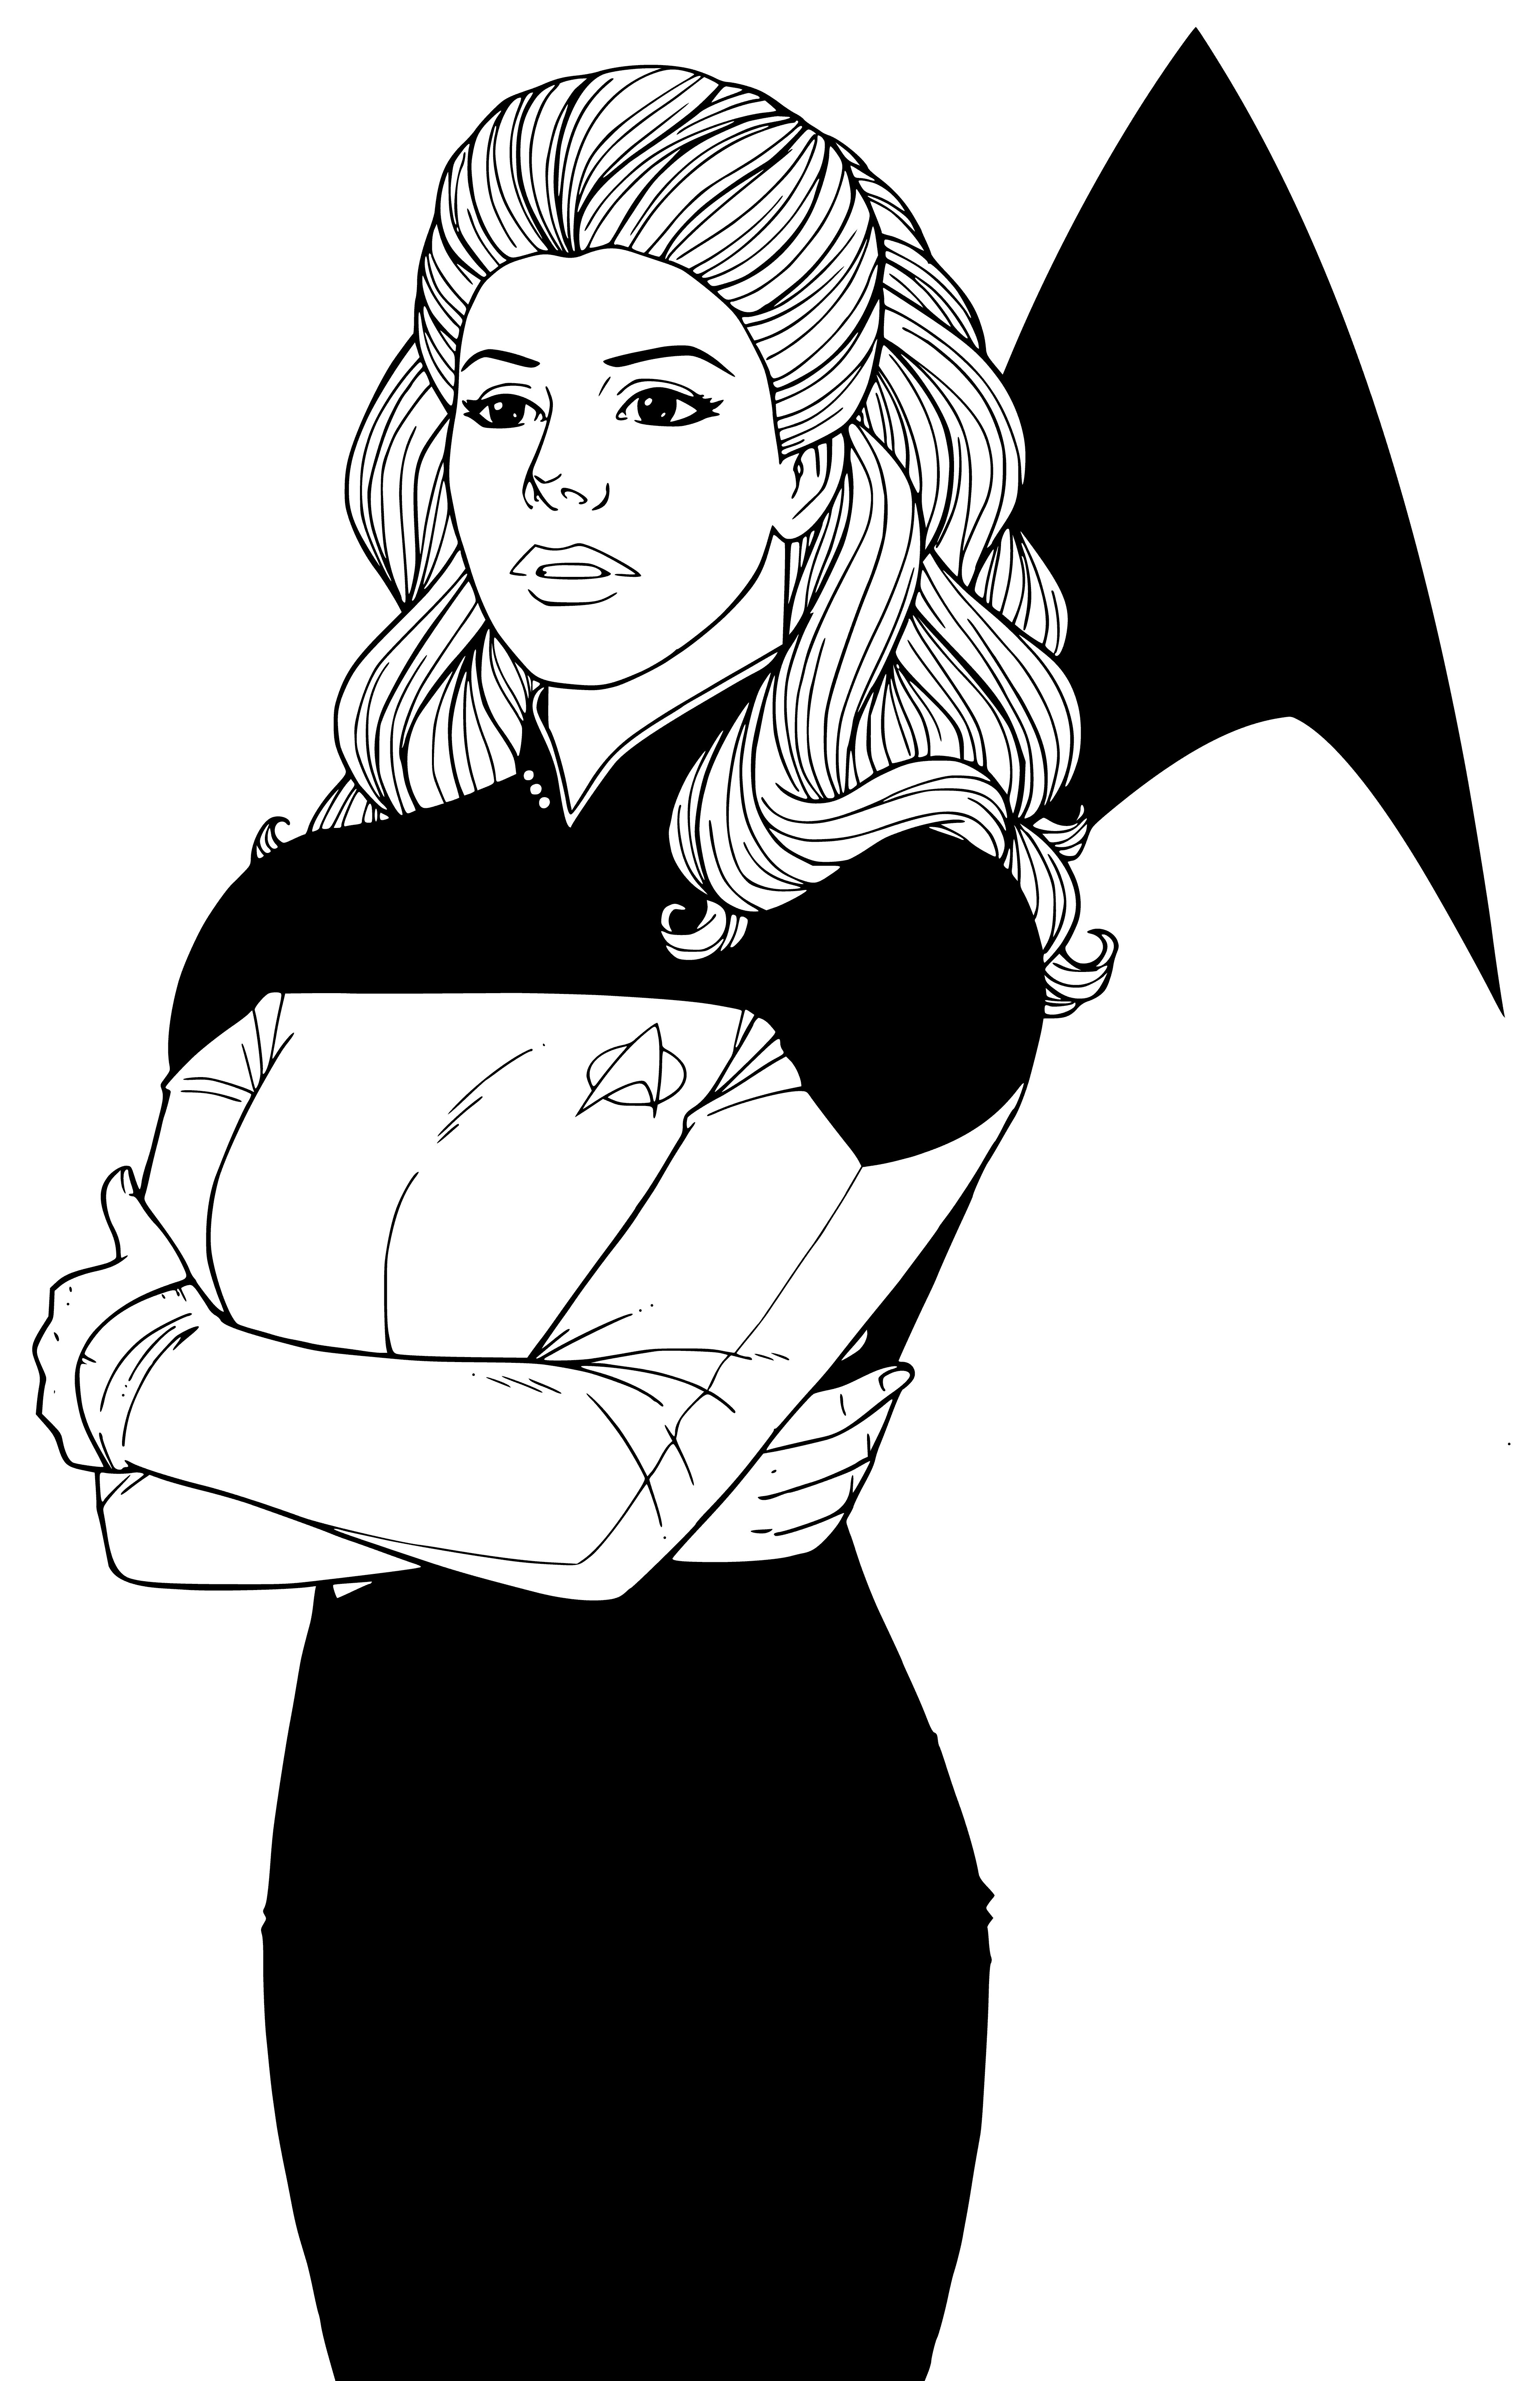 coloring page: Superpowered Diana fights for justice, using speed and strength to combat evil. She's a skilled fighter and an inspiring leader. #hero